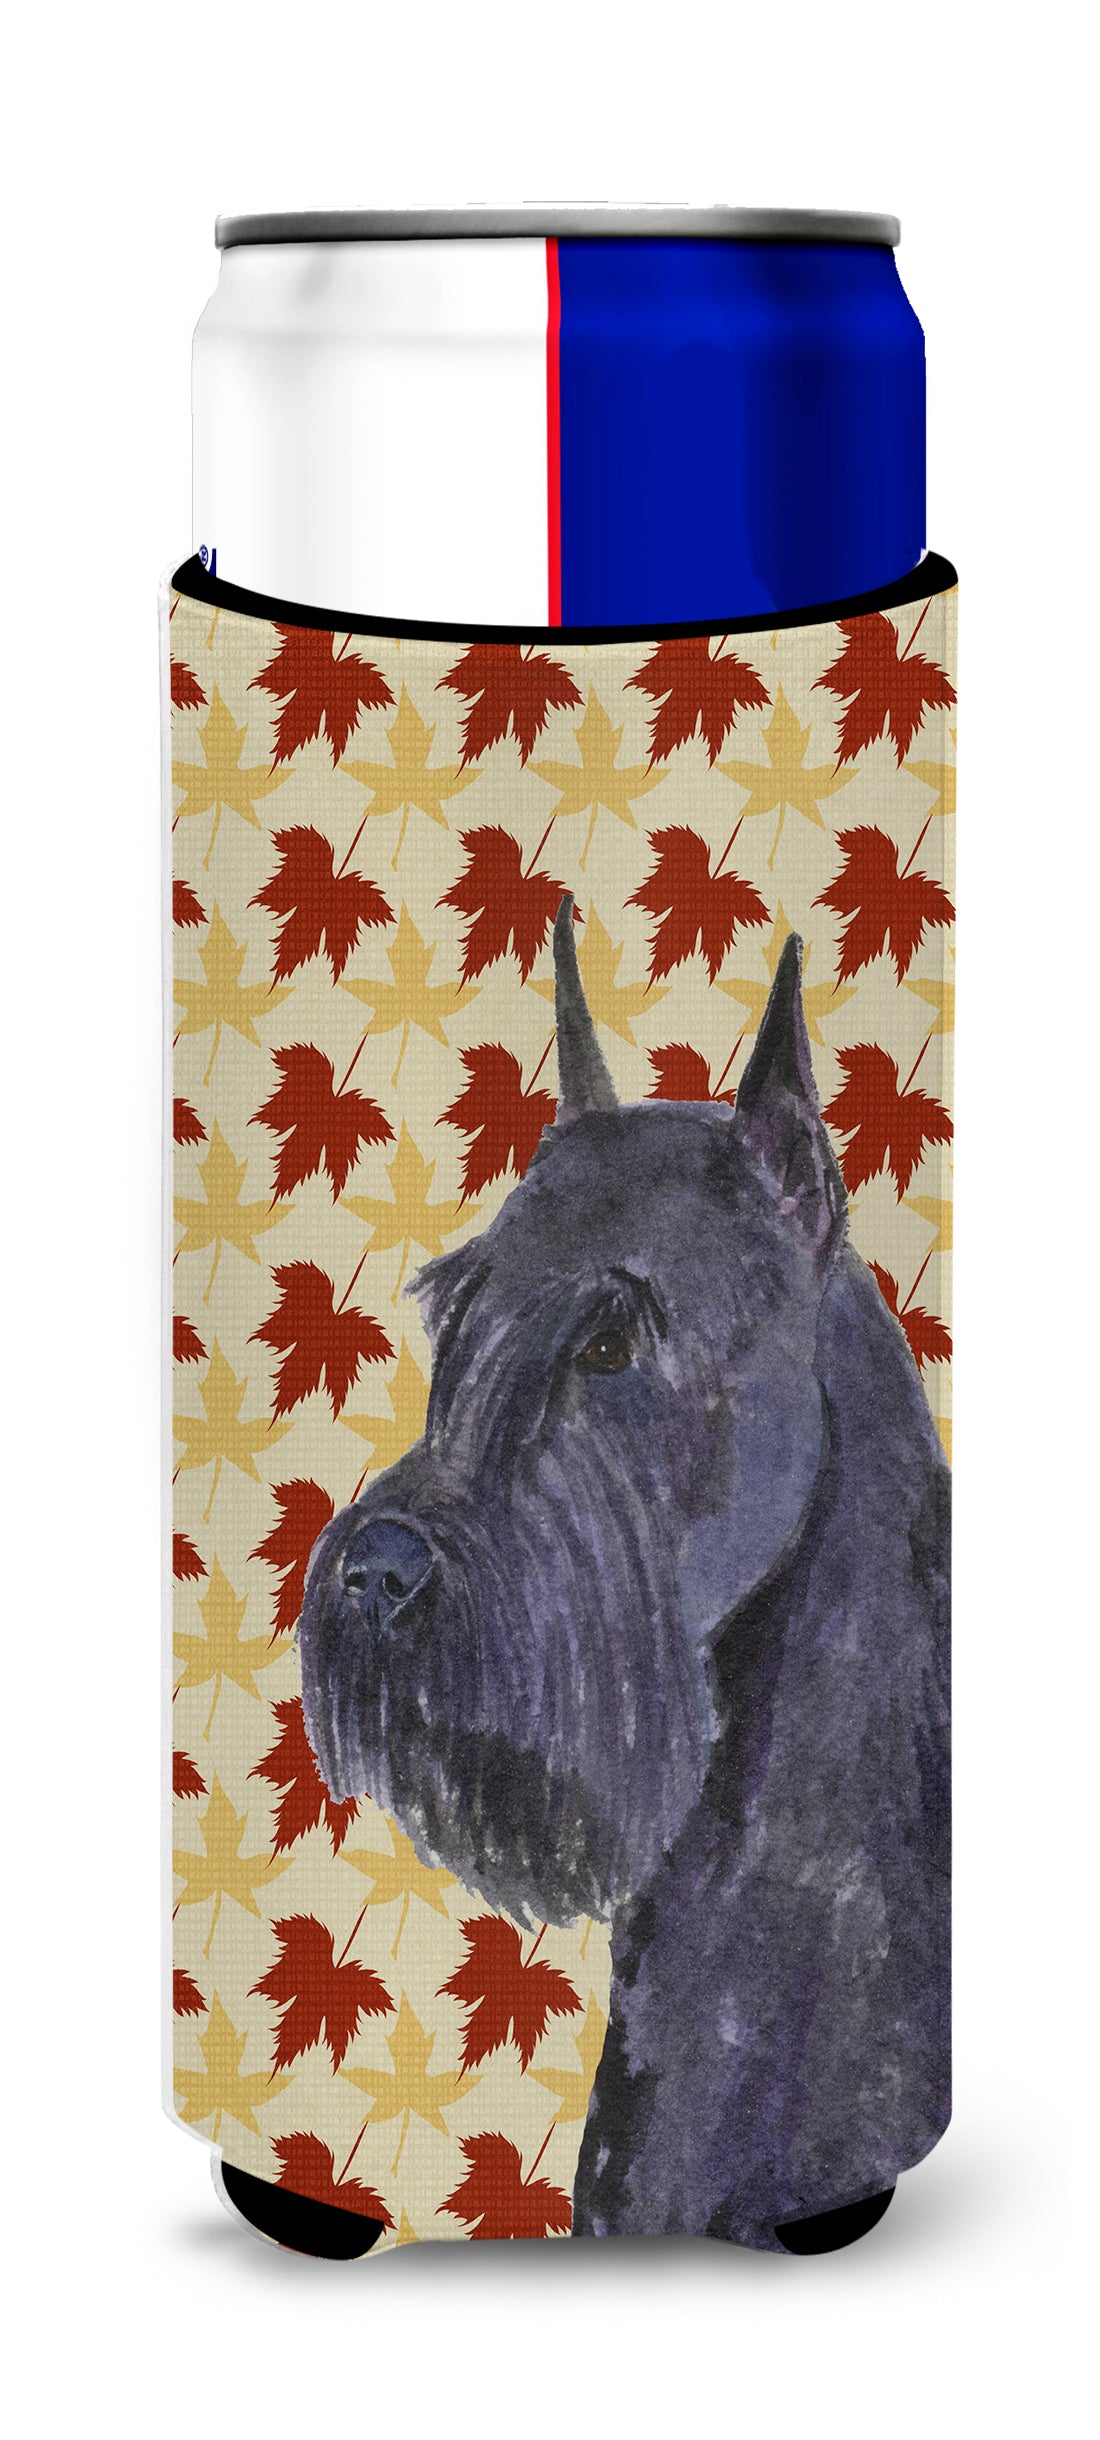 Schnauzer Giant Fall Leaves Portrait Ultra Beverage Insulators for slim cans SS4333MUK